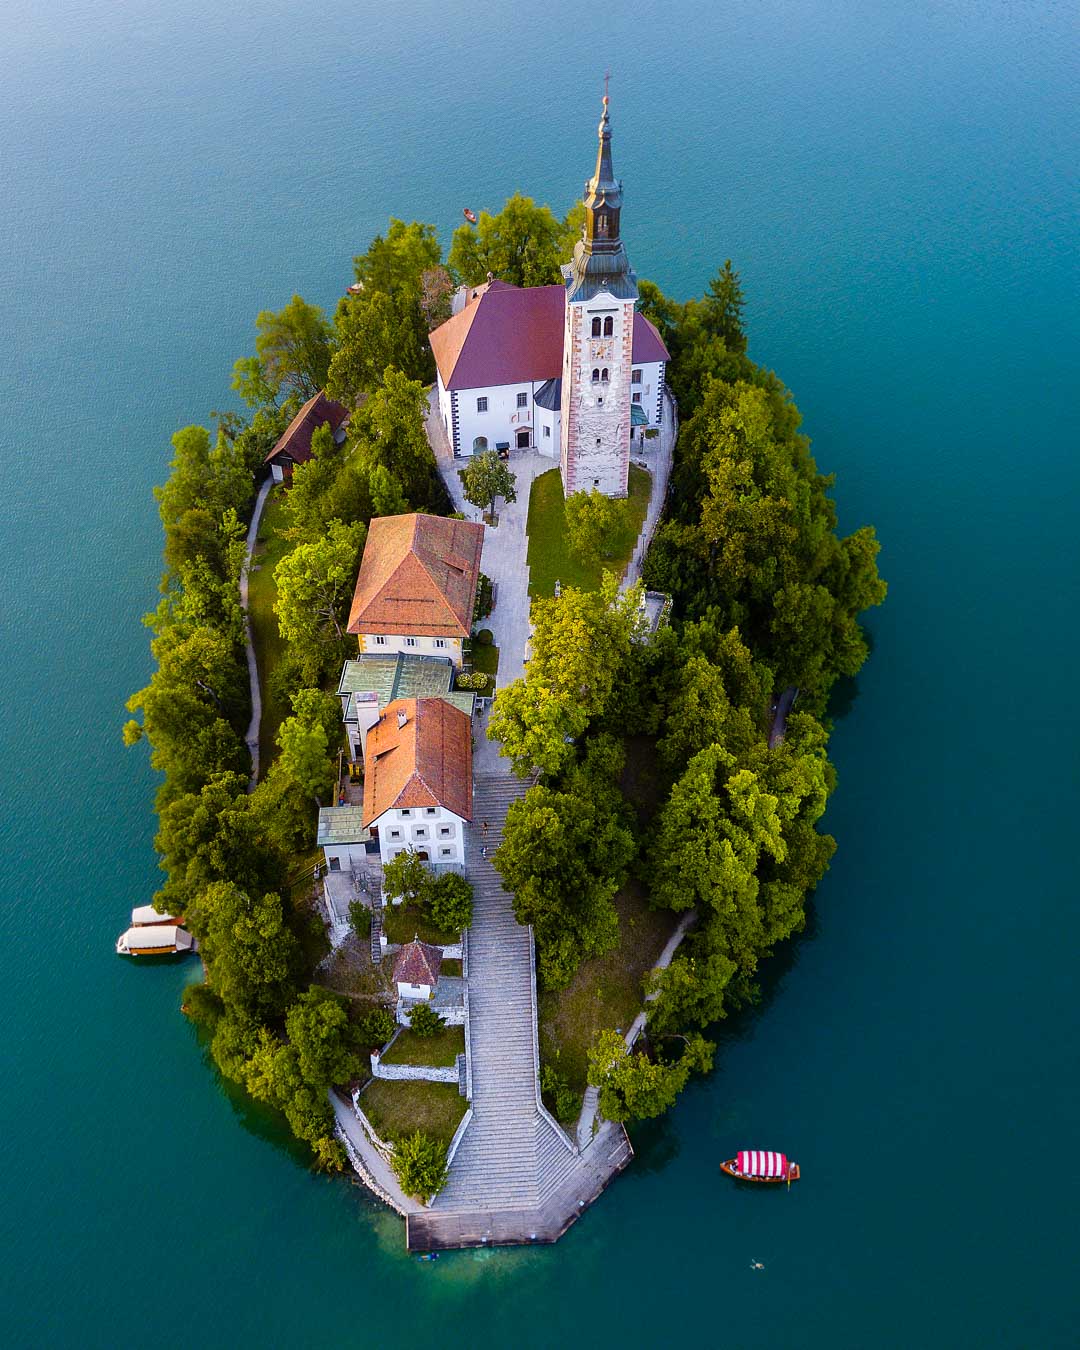 Bled island as seen from above